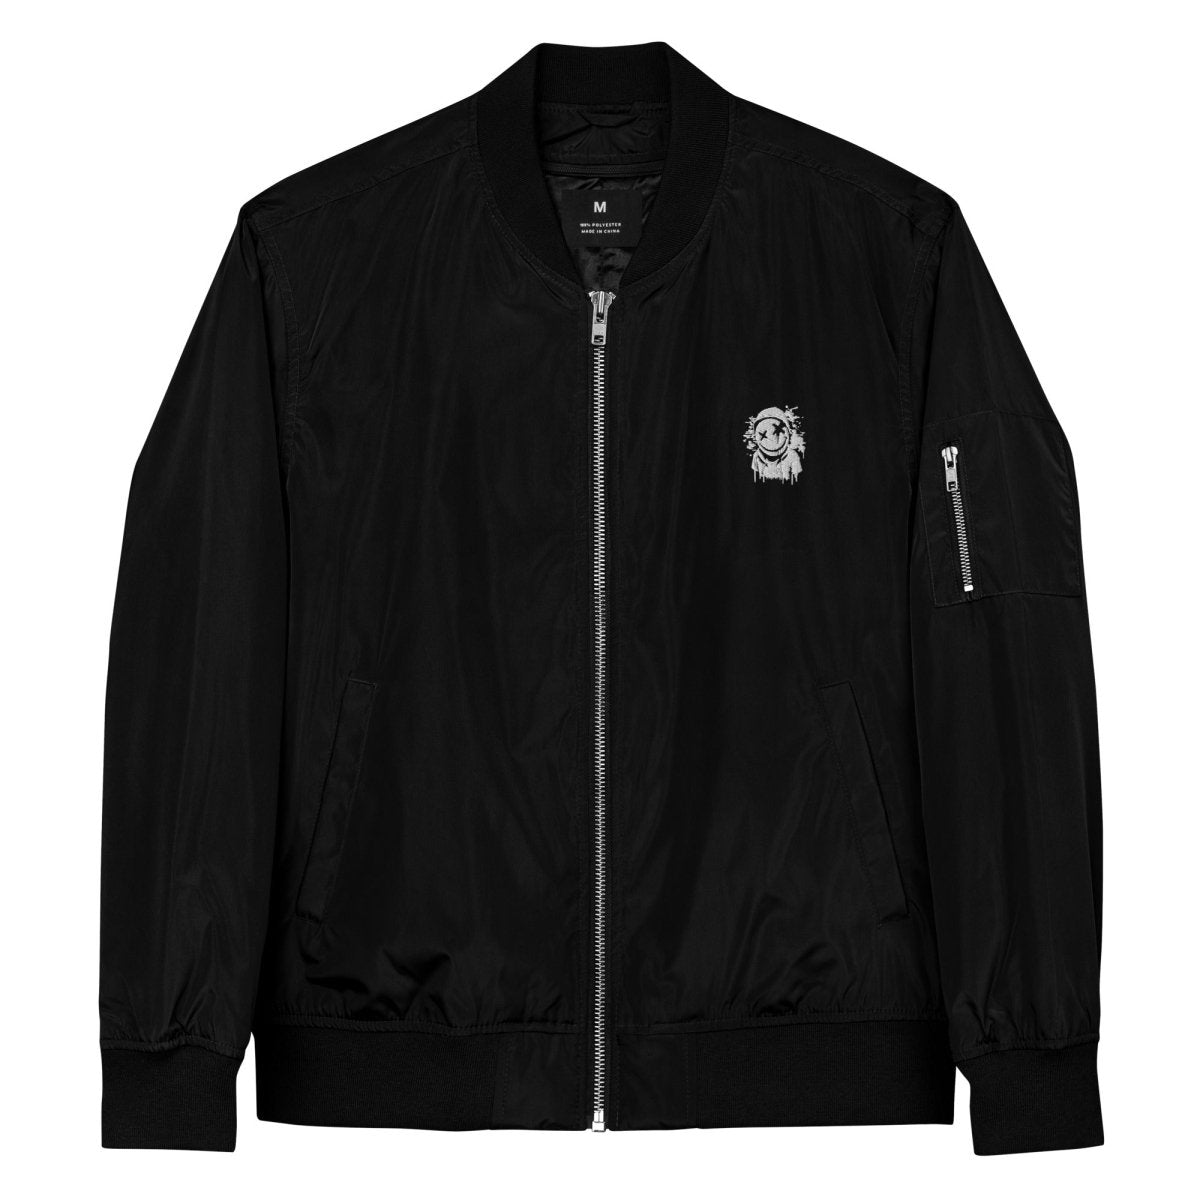 MH Classic Bomber Jacket Black - Mainly High